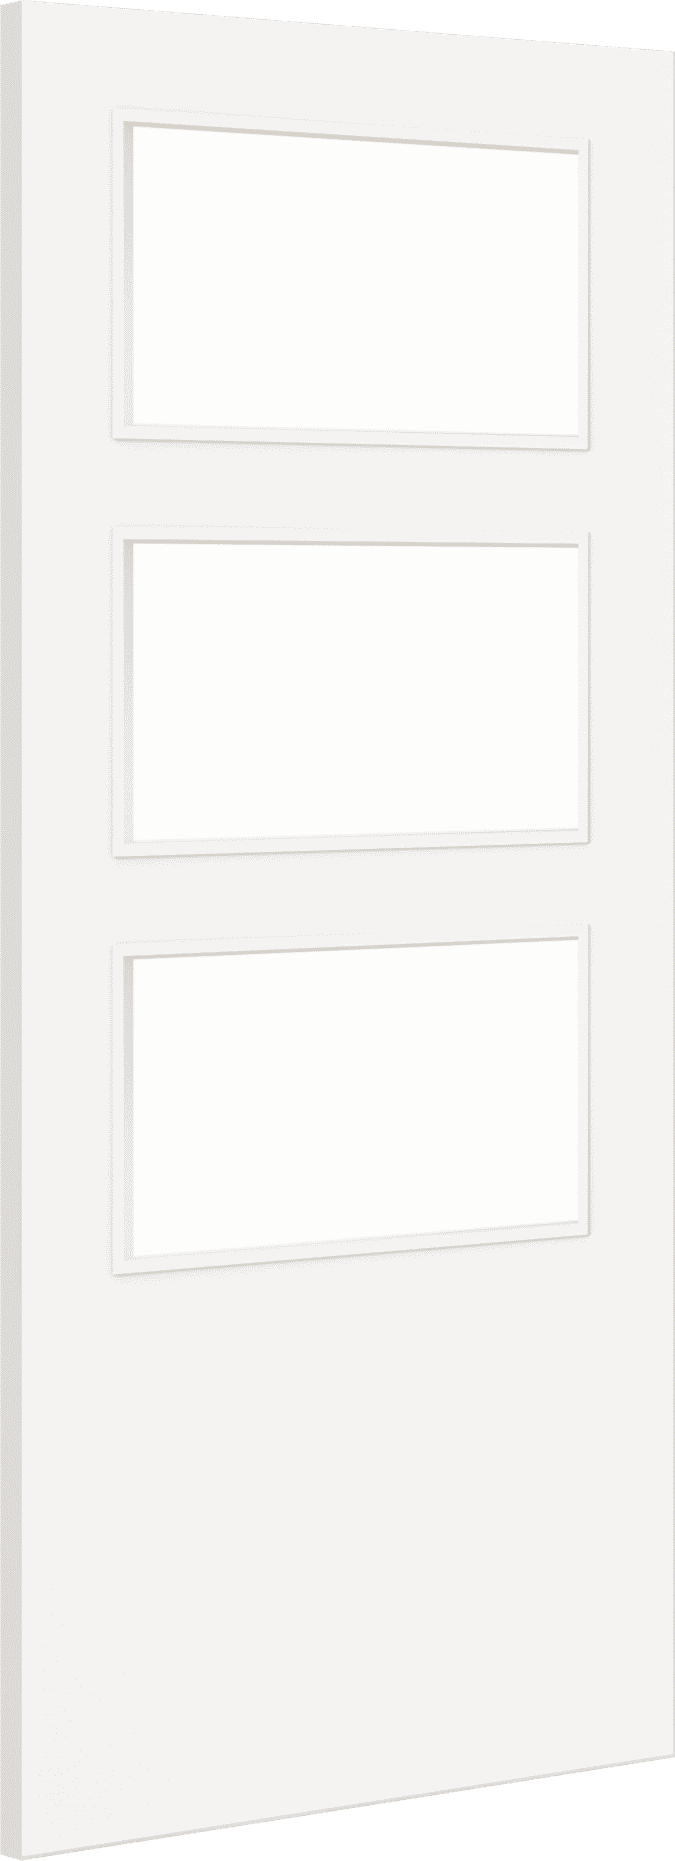 1981mm x 762mm x 44mm (30") Architectural Paint Grade White 03 Clear Glazed Fire Door Blank